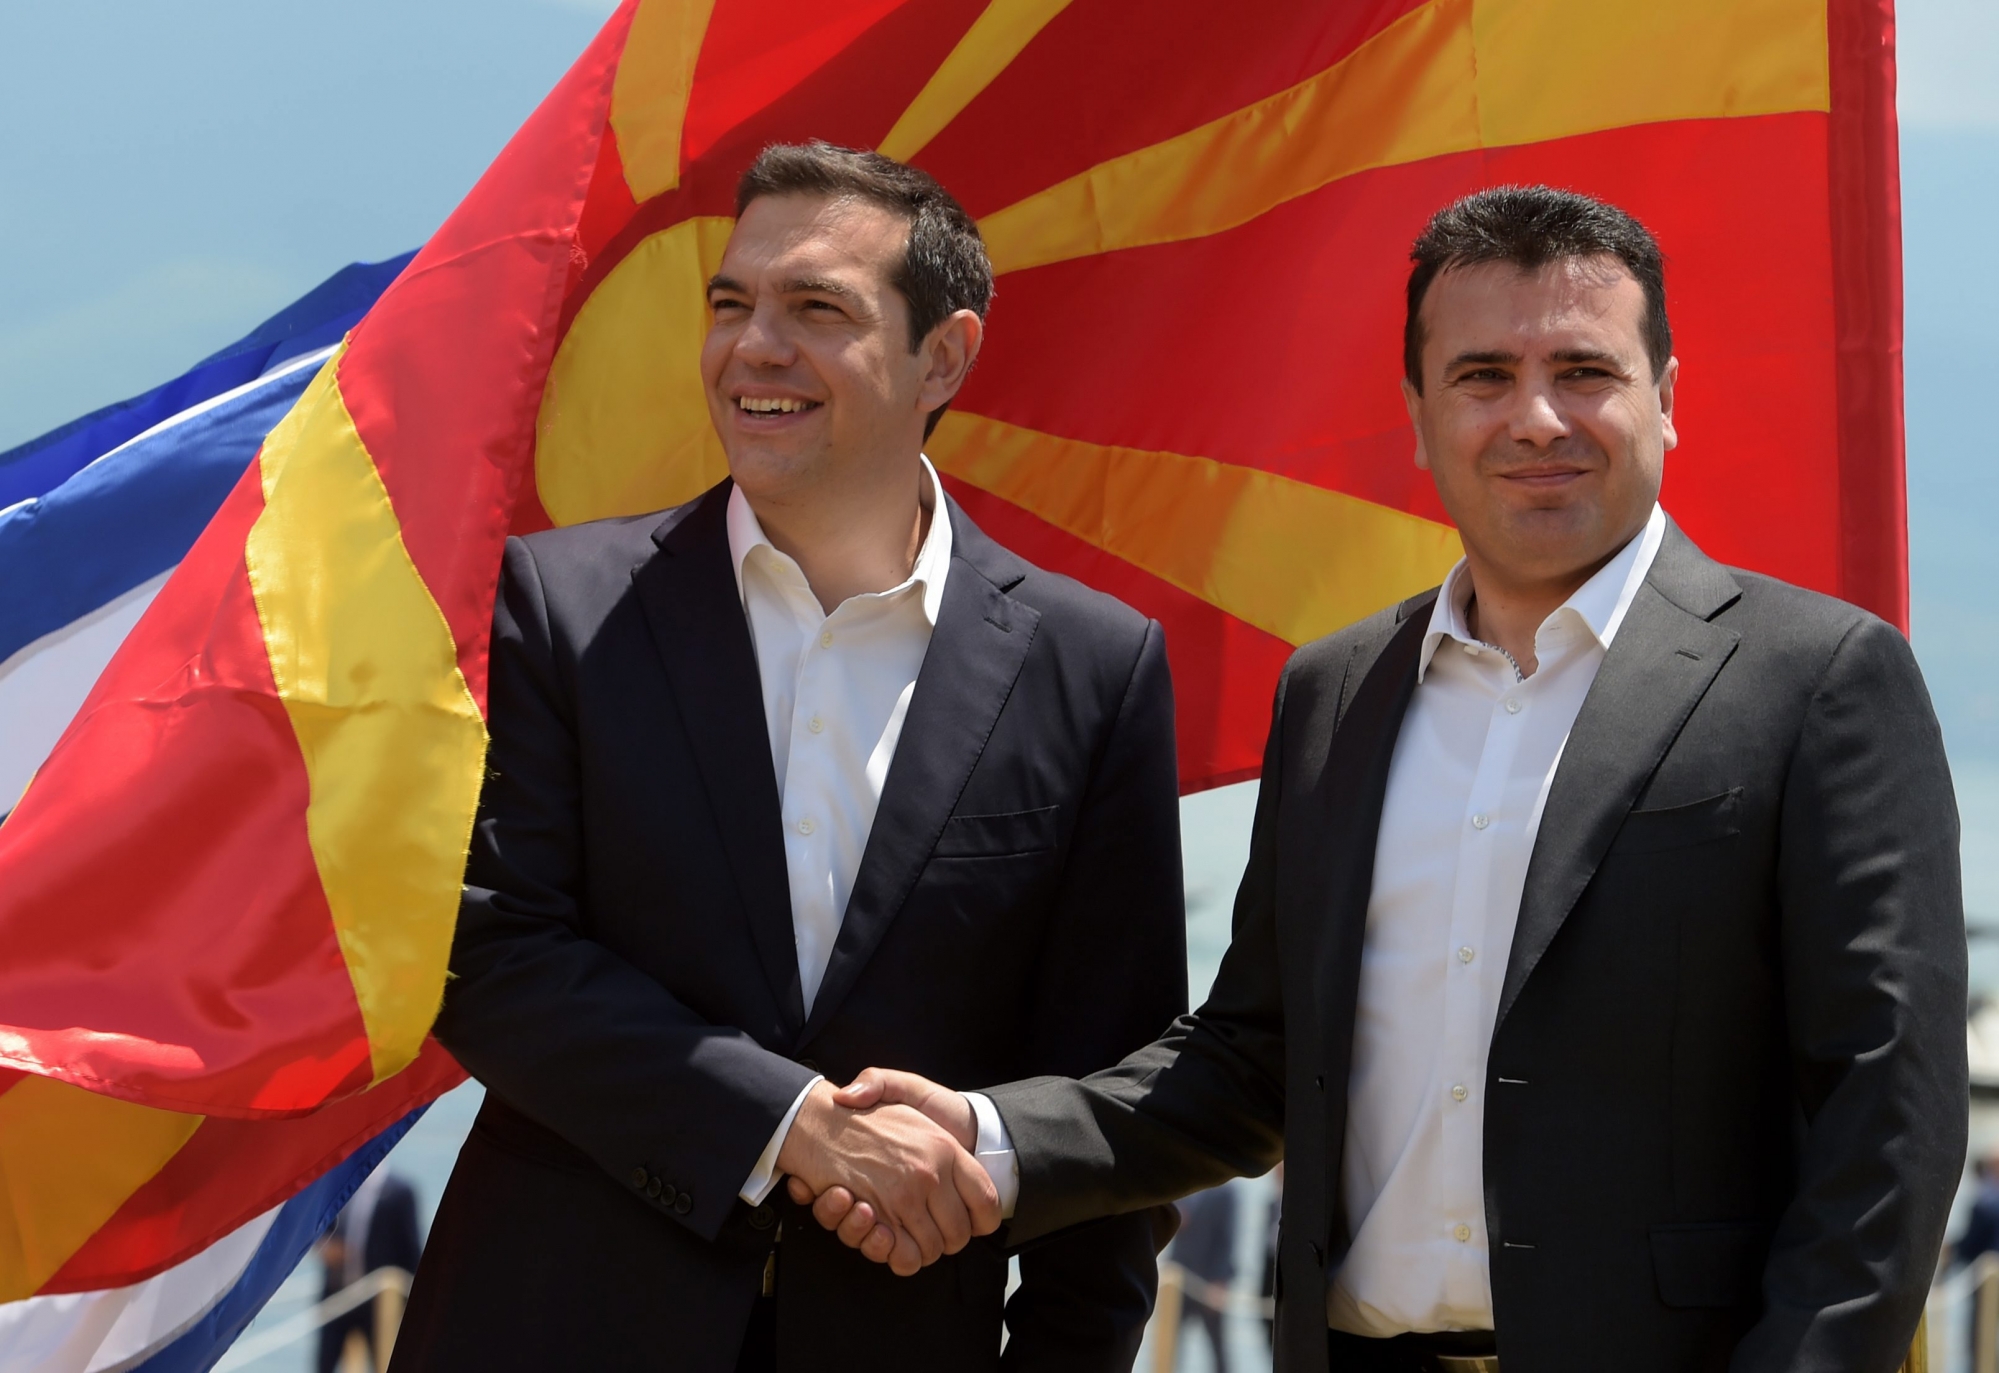 epa06815066 Greek Prime Minister Alexis Tsipras (L) and FYROM Prime Minister Zoran Zaev (R) shake hands after their arrival on Macedonian side of  the Lake Prespa, near Otesevo, the Former Yugoslav Republic of Macedonia (FYROM), 17 June 2018. Prime Ministers from Greece and Macedonia meet in the Prespes lake district, that borders both countries, and sign an agreement aimed at ending a decades-long dispute between their countries. The agreement shall lead to the renaming of Greece's northern neighbour, as well as its EU and NATO entry.  EPA/NAKE BATEV FYROM GREECE NAME DISPUTE AGREEMENT